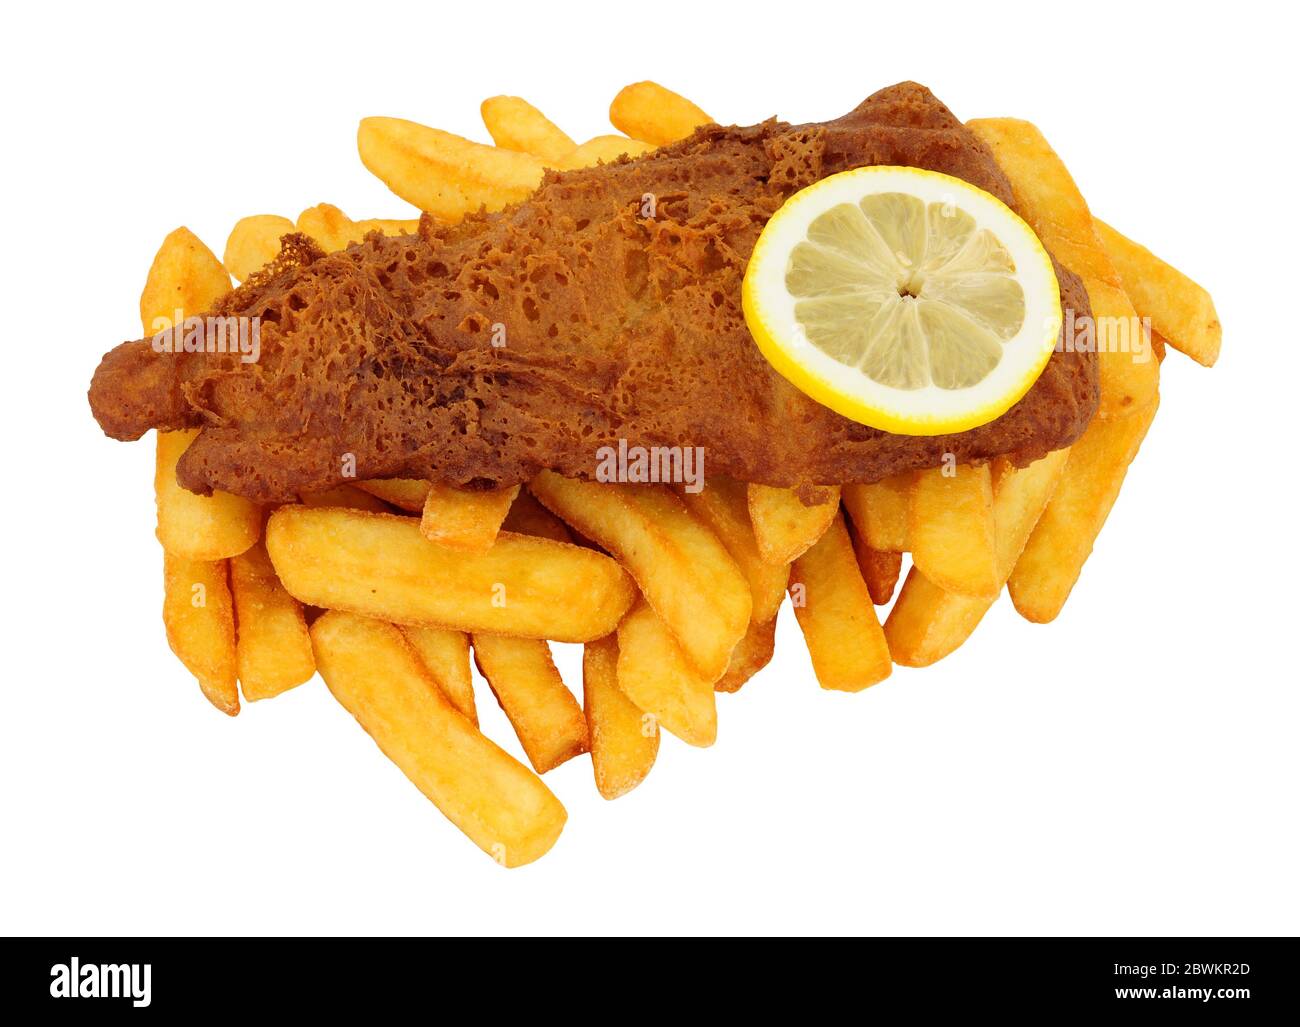 Beer battered fish and chips meal isolated on a white background Stock Photo